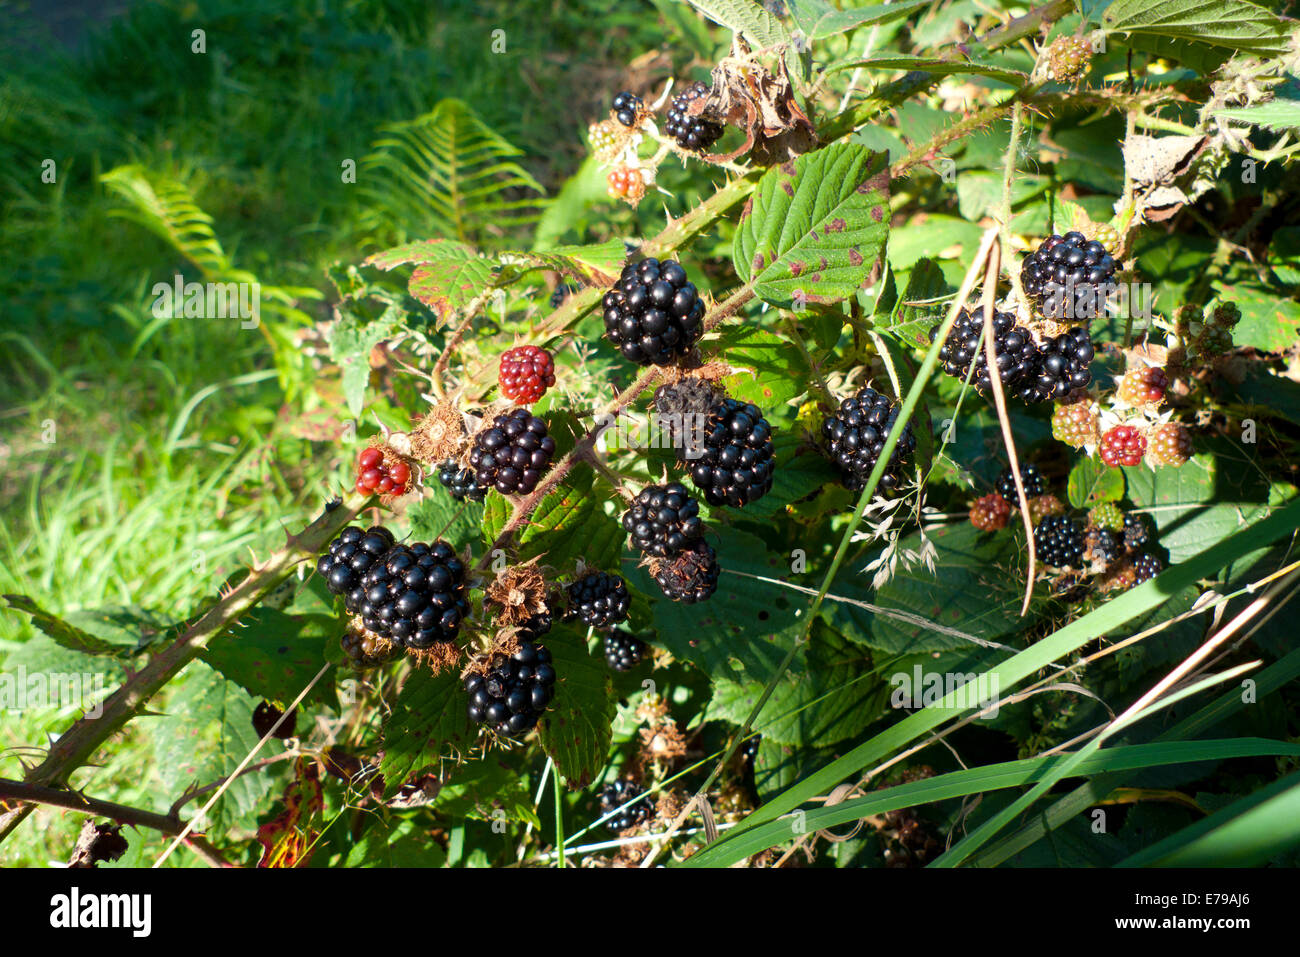 Foraging for wild ripe blackberries growing in a hedgerow in autumn Carmarthenshire Wales UK  KATHY DEWITT Stock Photo